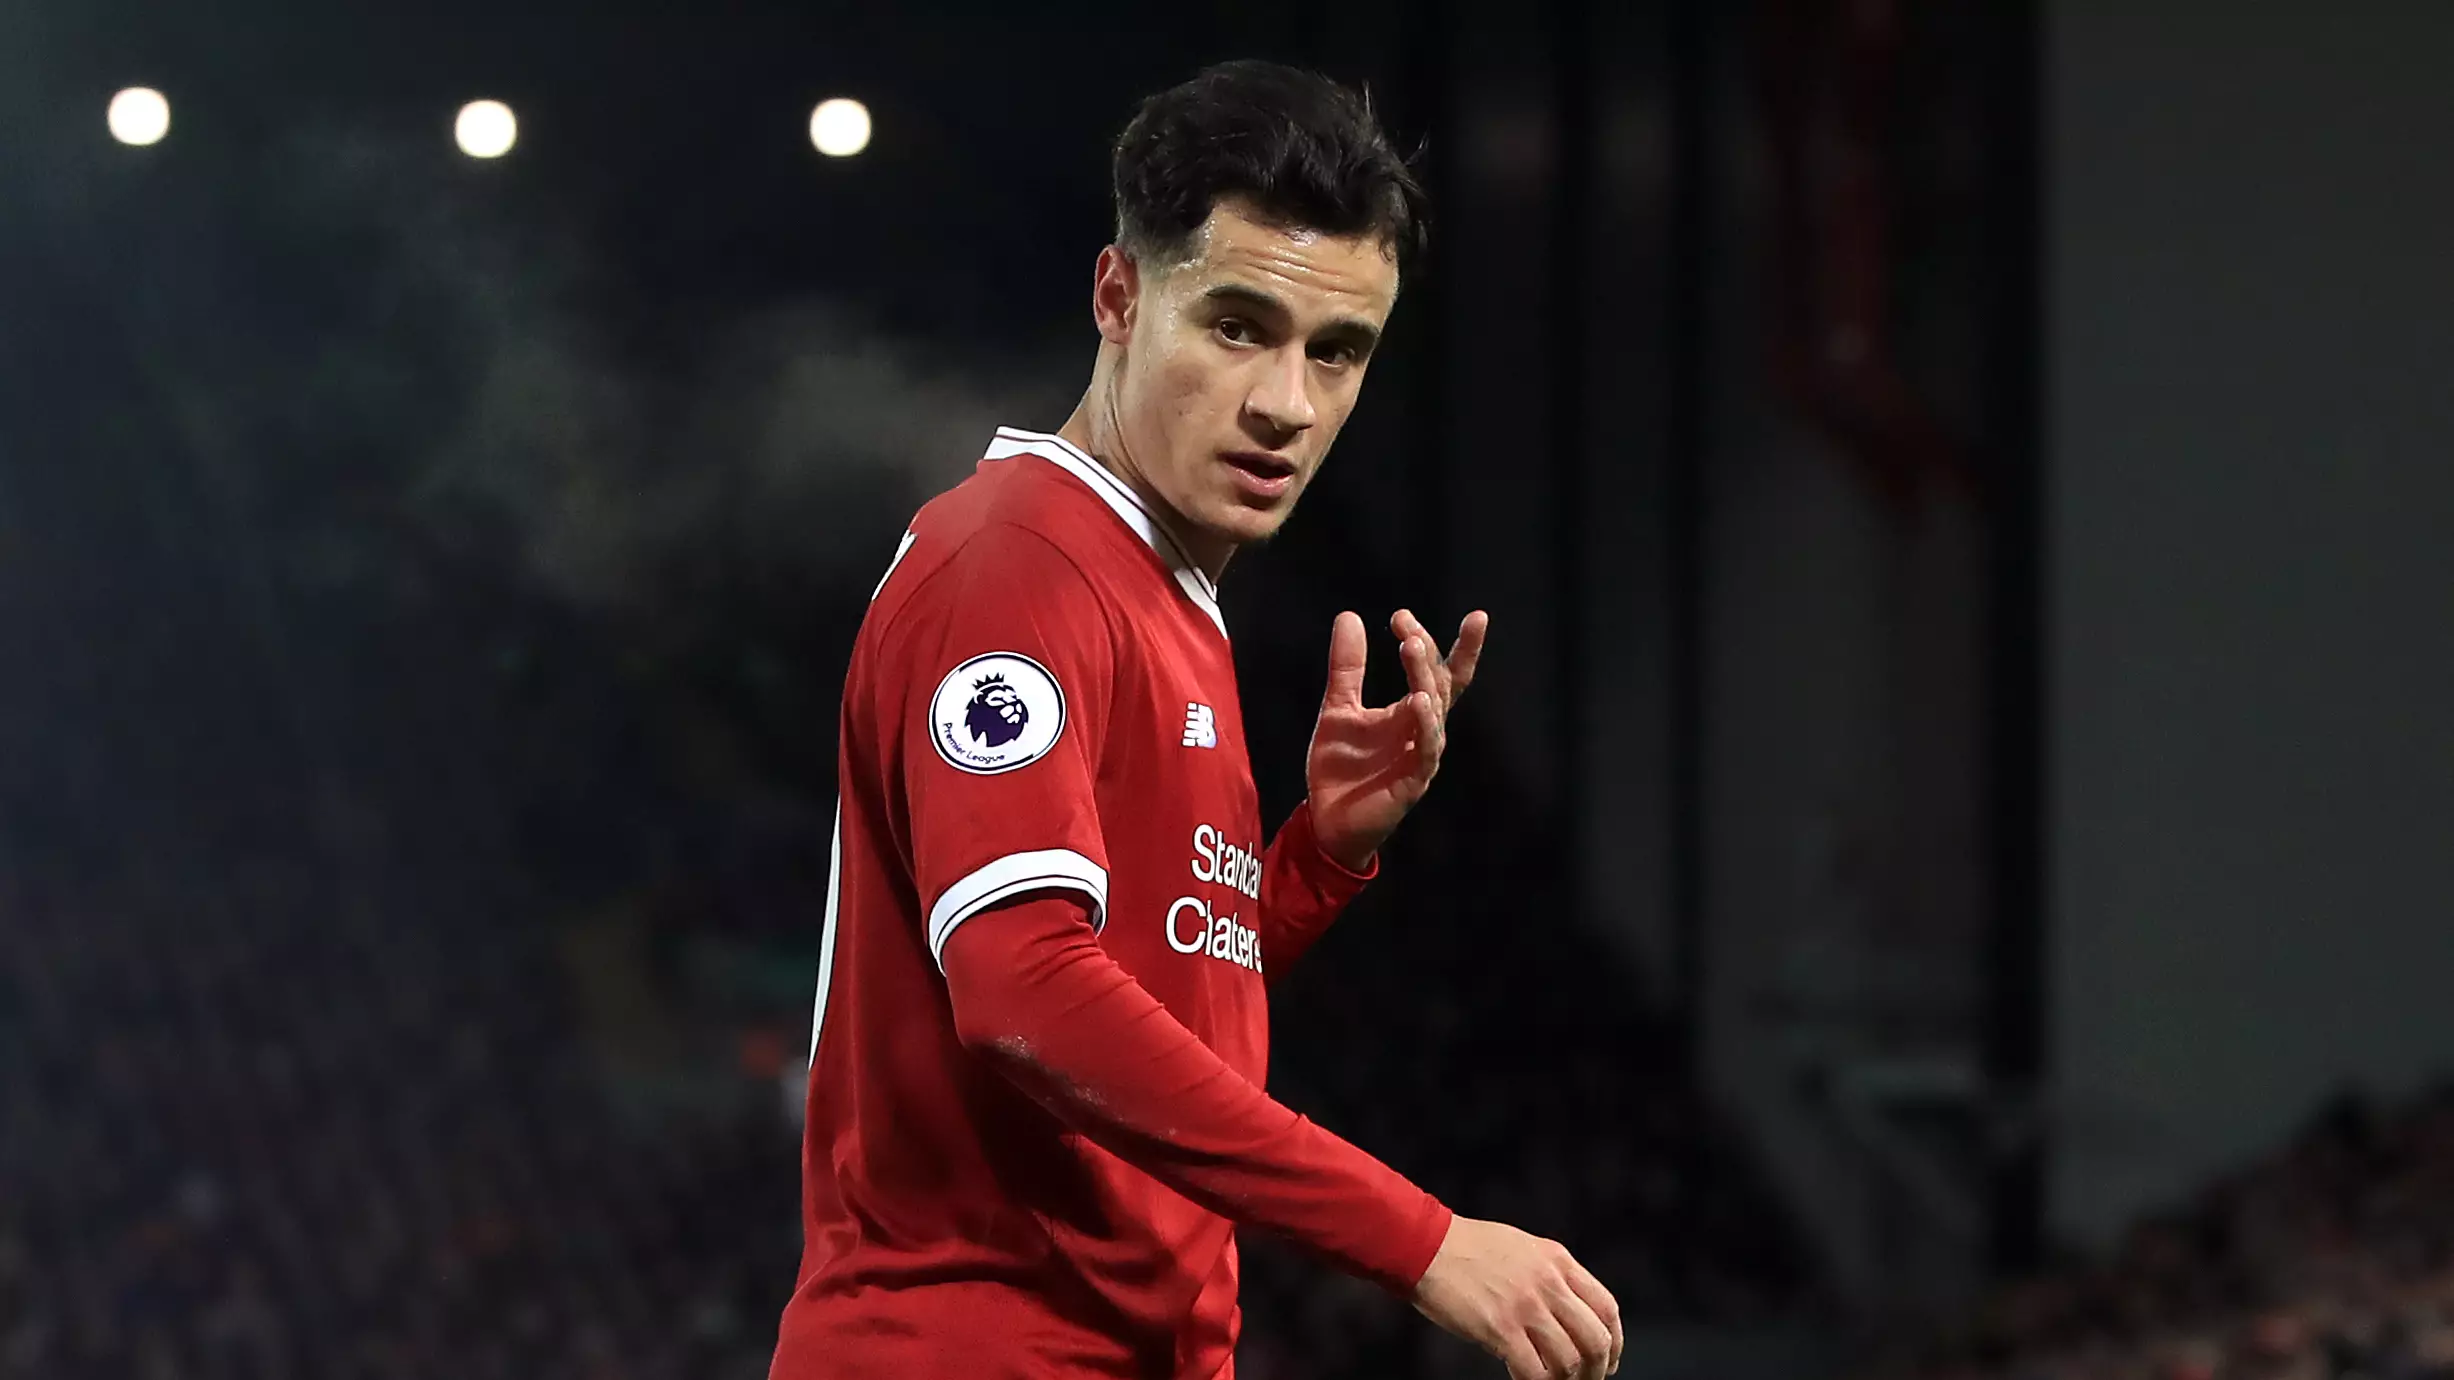 Liverpool's Brilliant Gesture To Fans Who Bought 2017/18 Coutinho Shirts